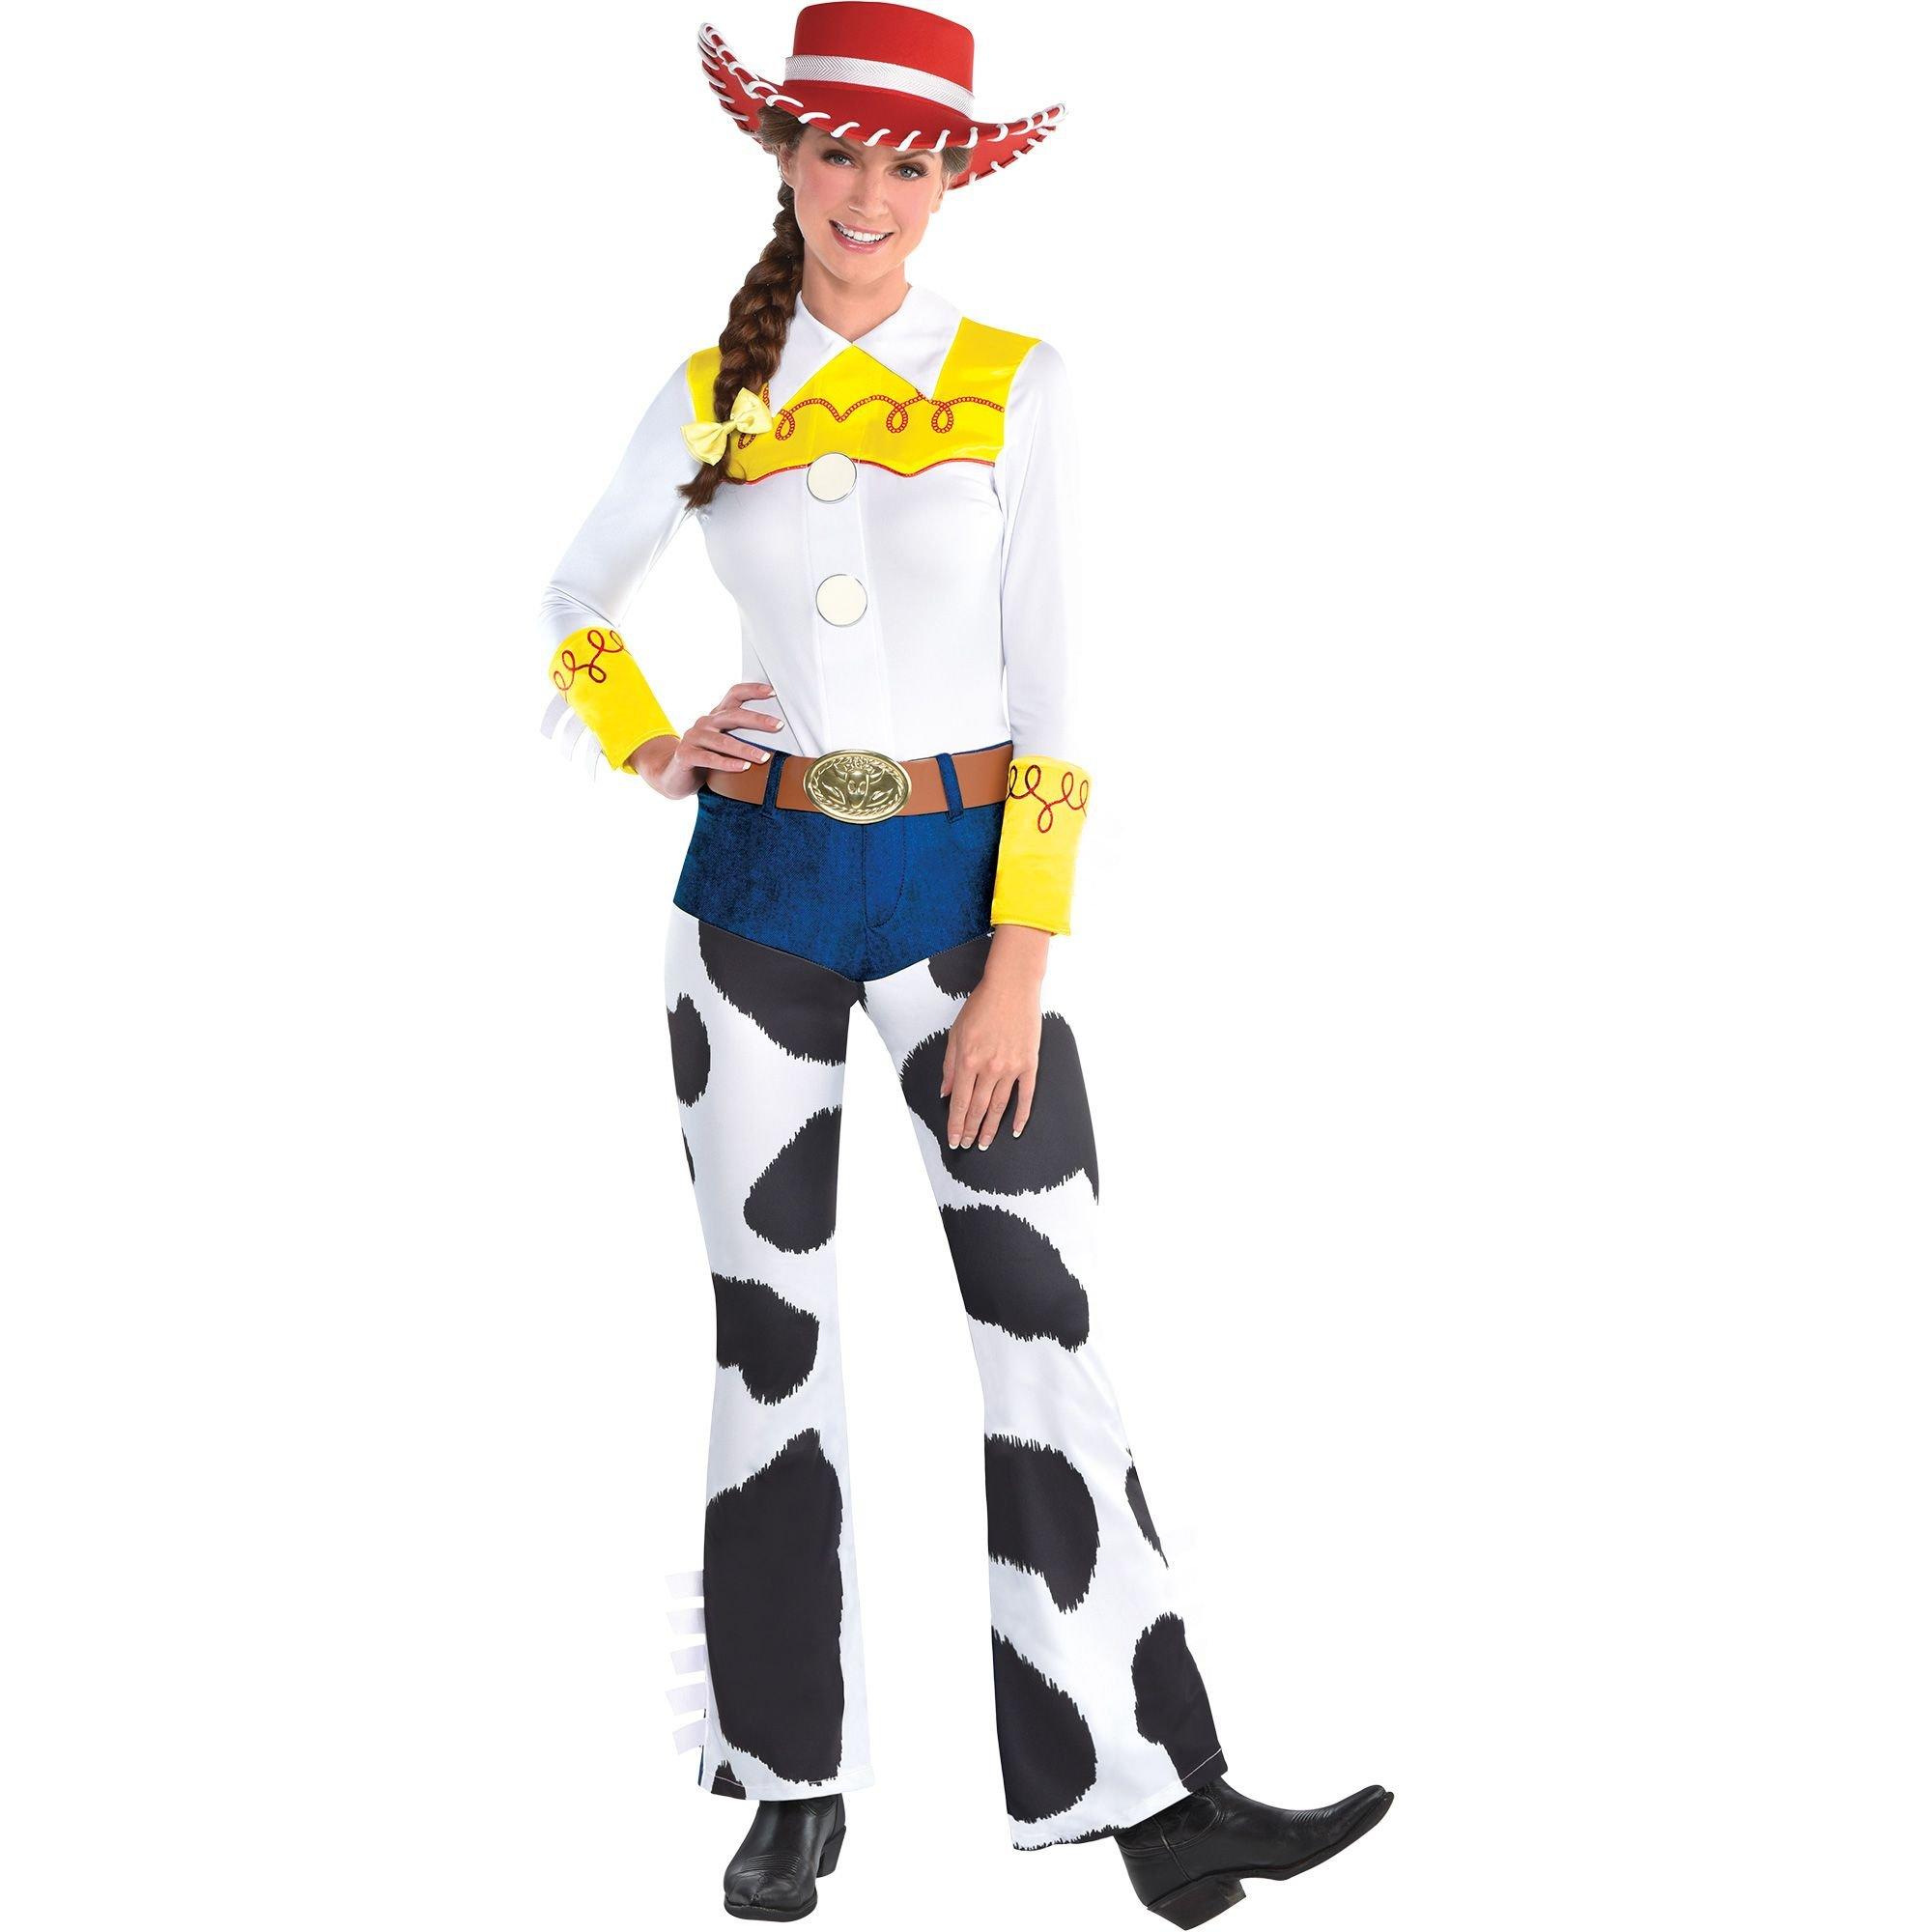 Dinsey Plus Size Woody Toy Story Halloween Costume, Adult Deluxe Cowboy  Outfit for Men